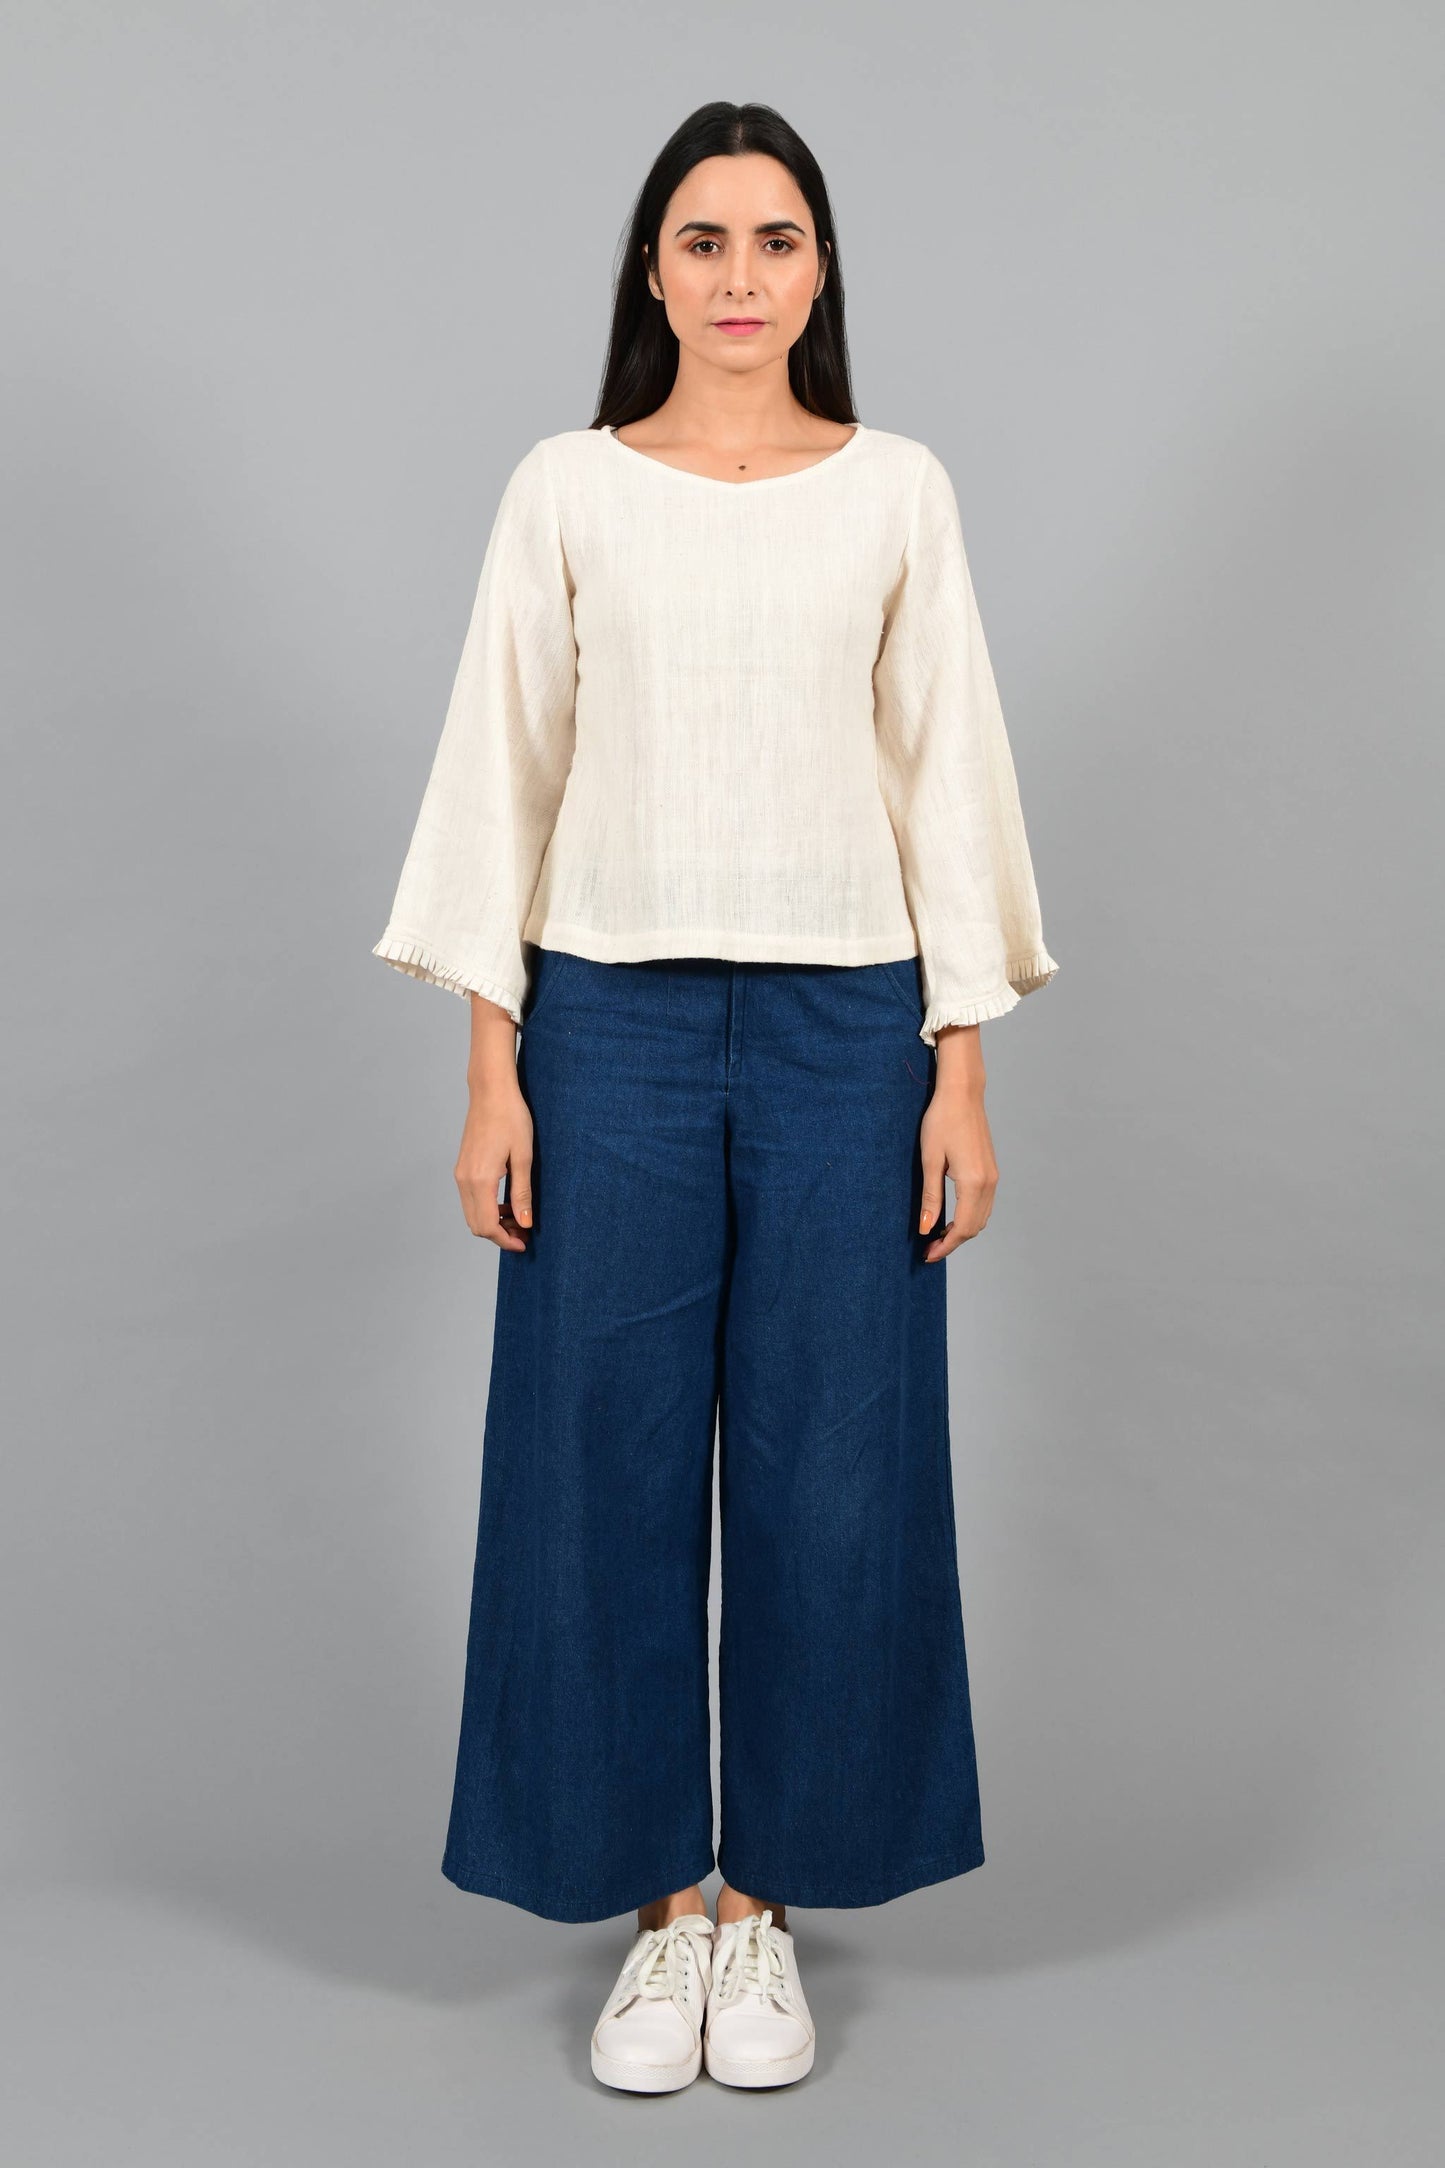 Front pose of an Indian female womenswear fashion model in an off-white Cashmere Cotton Top with bell sleeves made using handspun and handwoven khadi cotton by Cotton Rack.